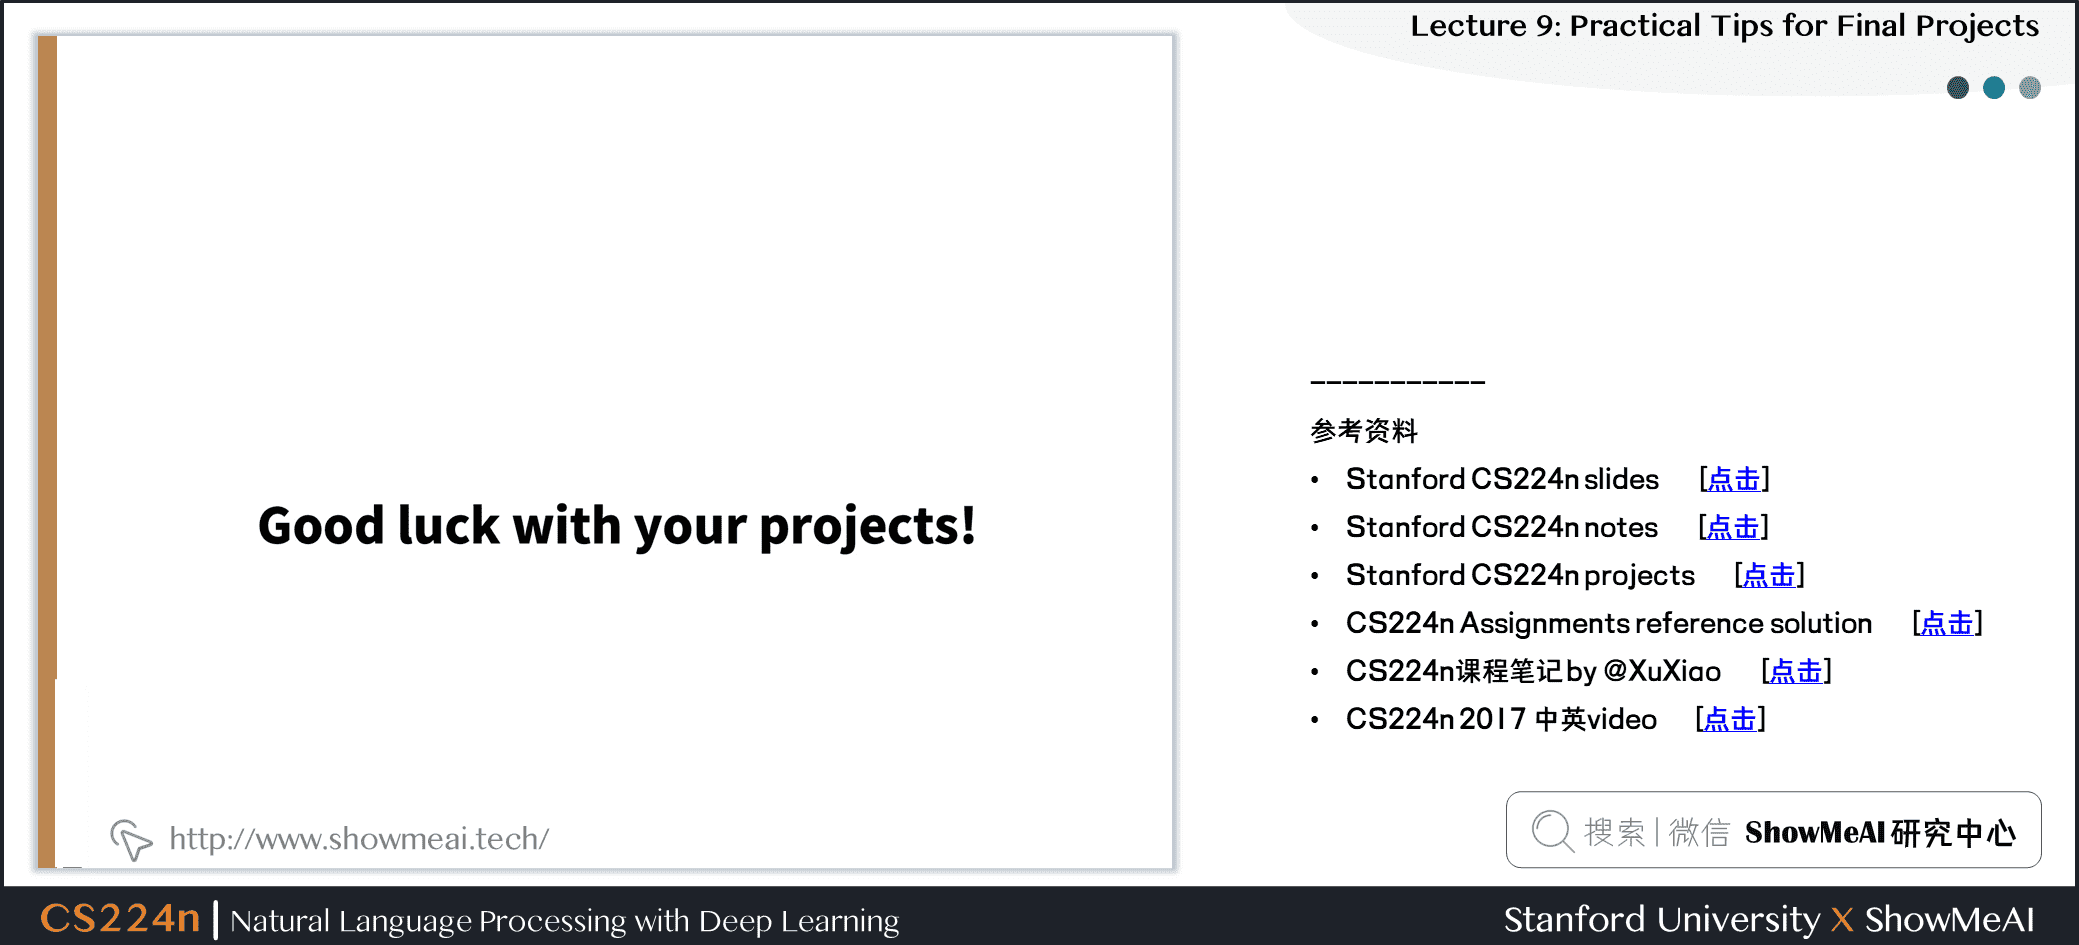 Good luck with your projects!